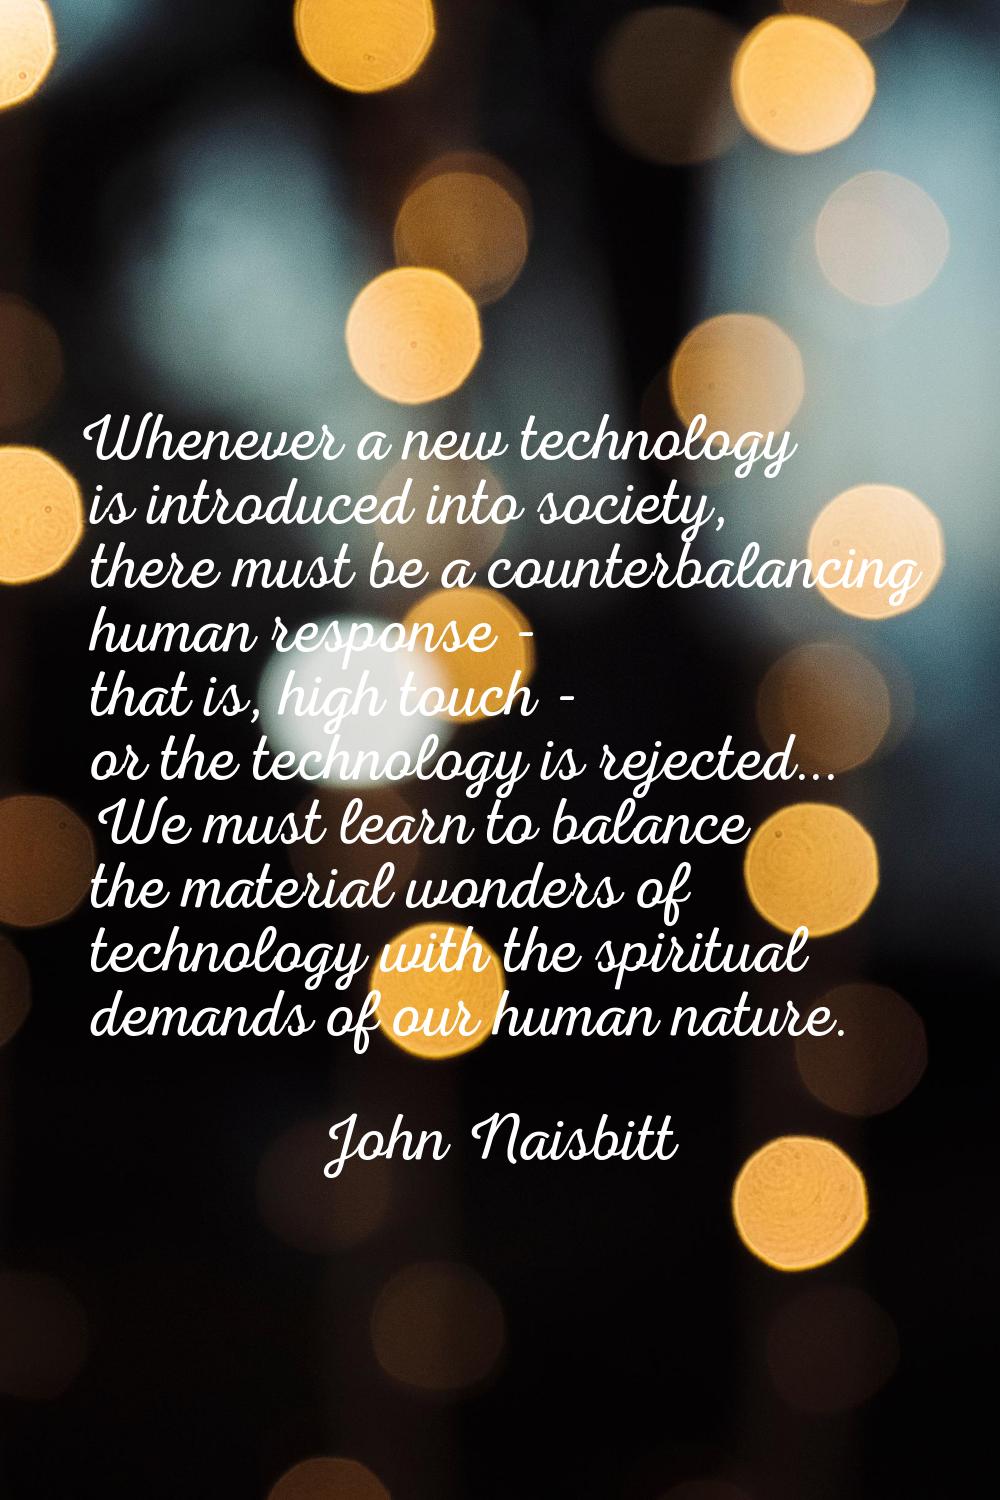 Whenever a new technology is introduced into society, there must be a counterbalancing human respon